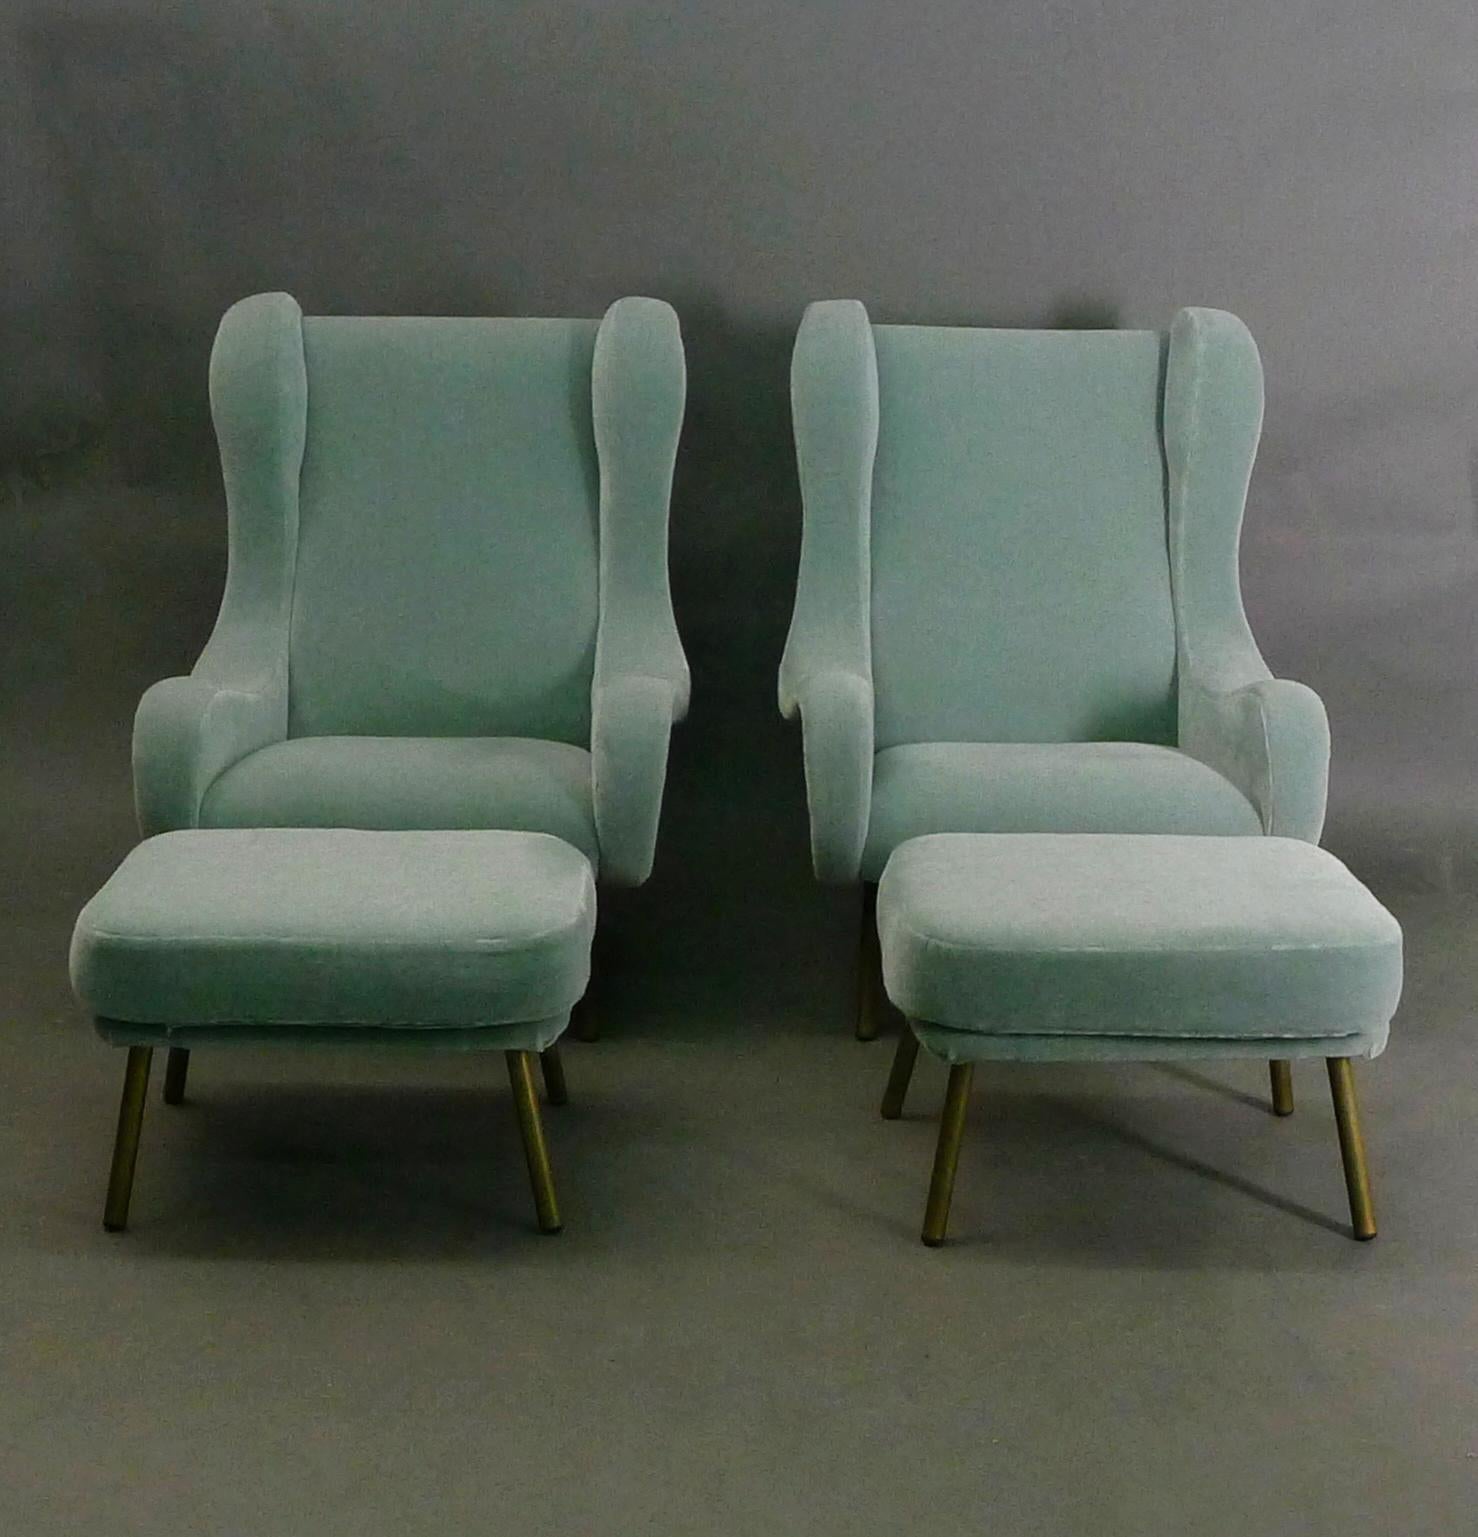 Marco Zanuso, Pair of Senior Chairs, 1950s and matching pair of ottomans For Sale 6